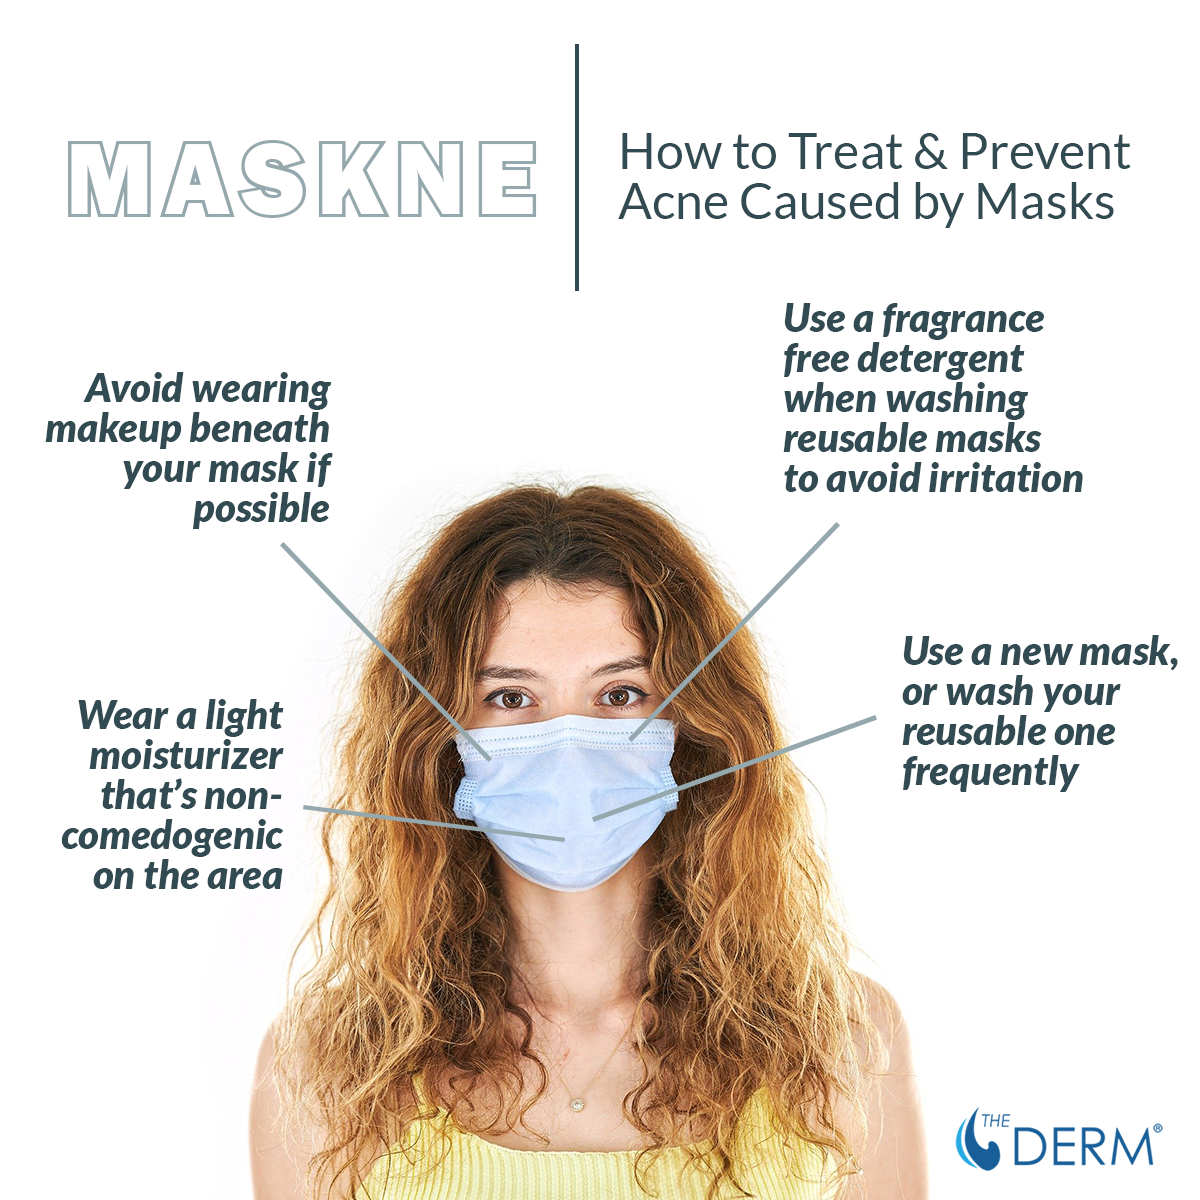 Maskne How To Avoid And Treat Acne Caused By Wearing A Face Mask The